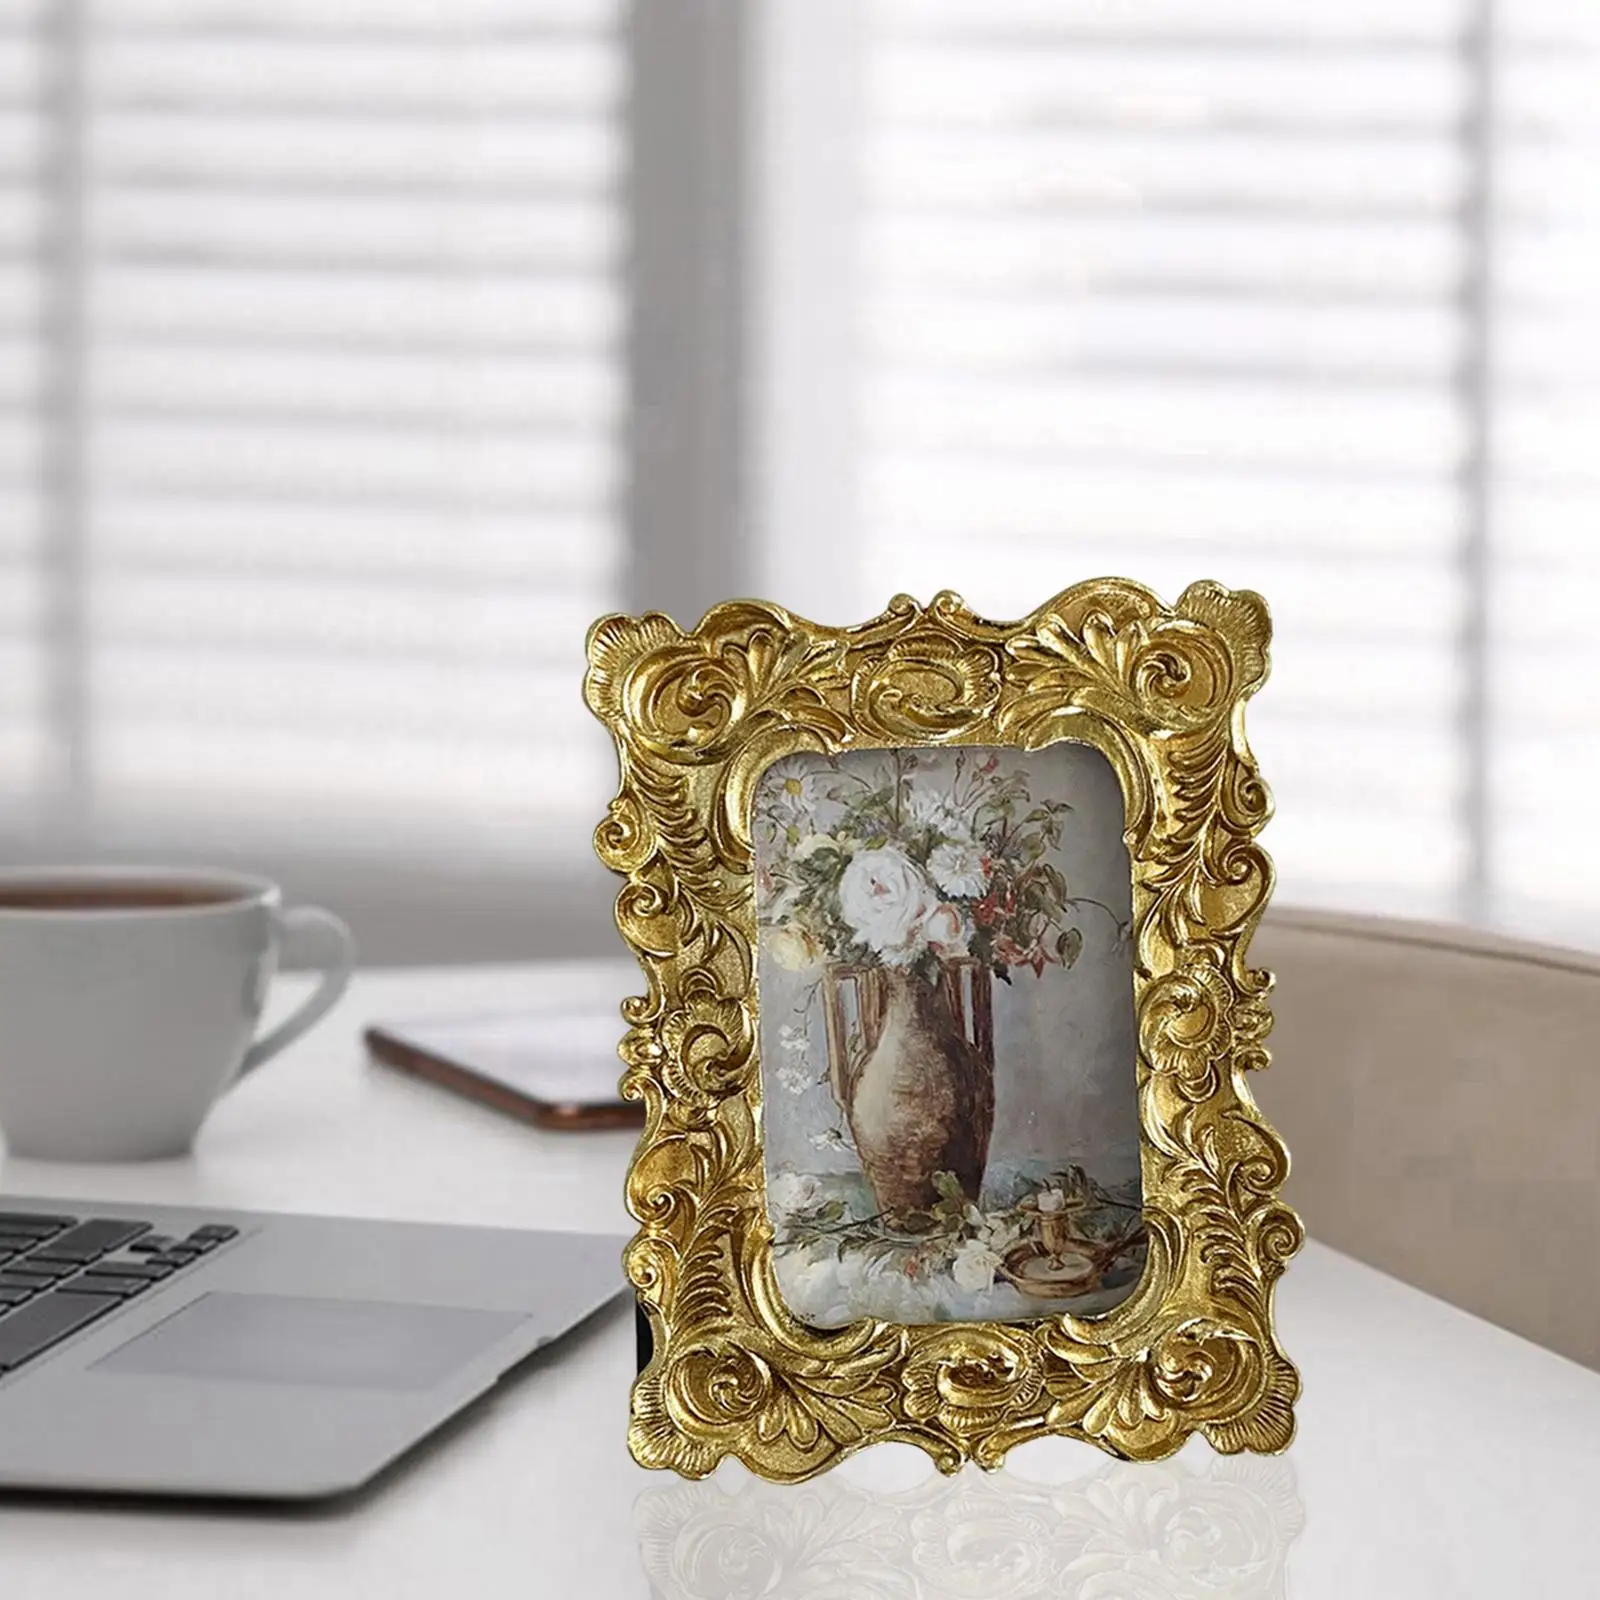 Vintage Style Photo Frame Photo Holder Ornament Embossed Elegant for Hotel Collectible Living Room Anniversary Home Decoration